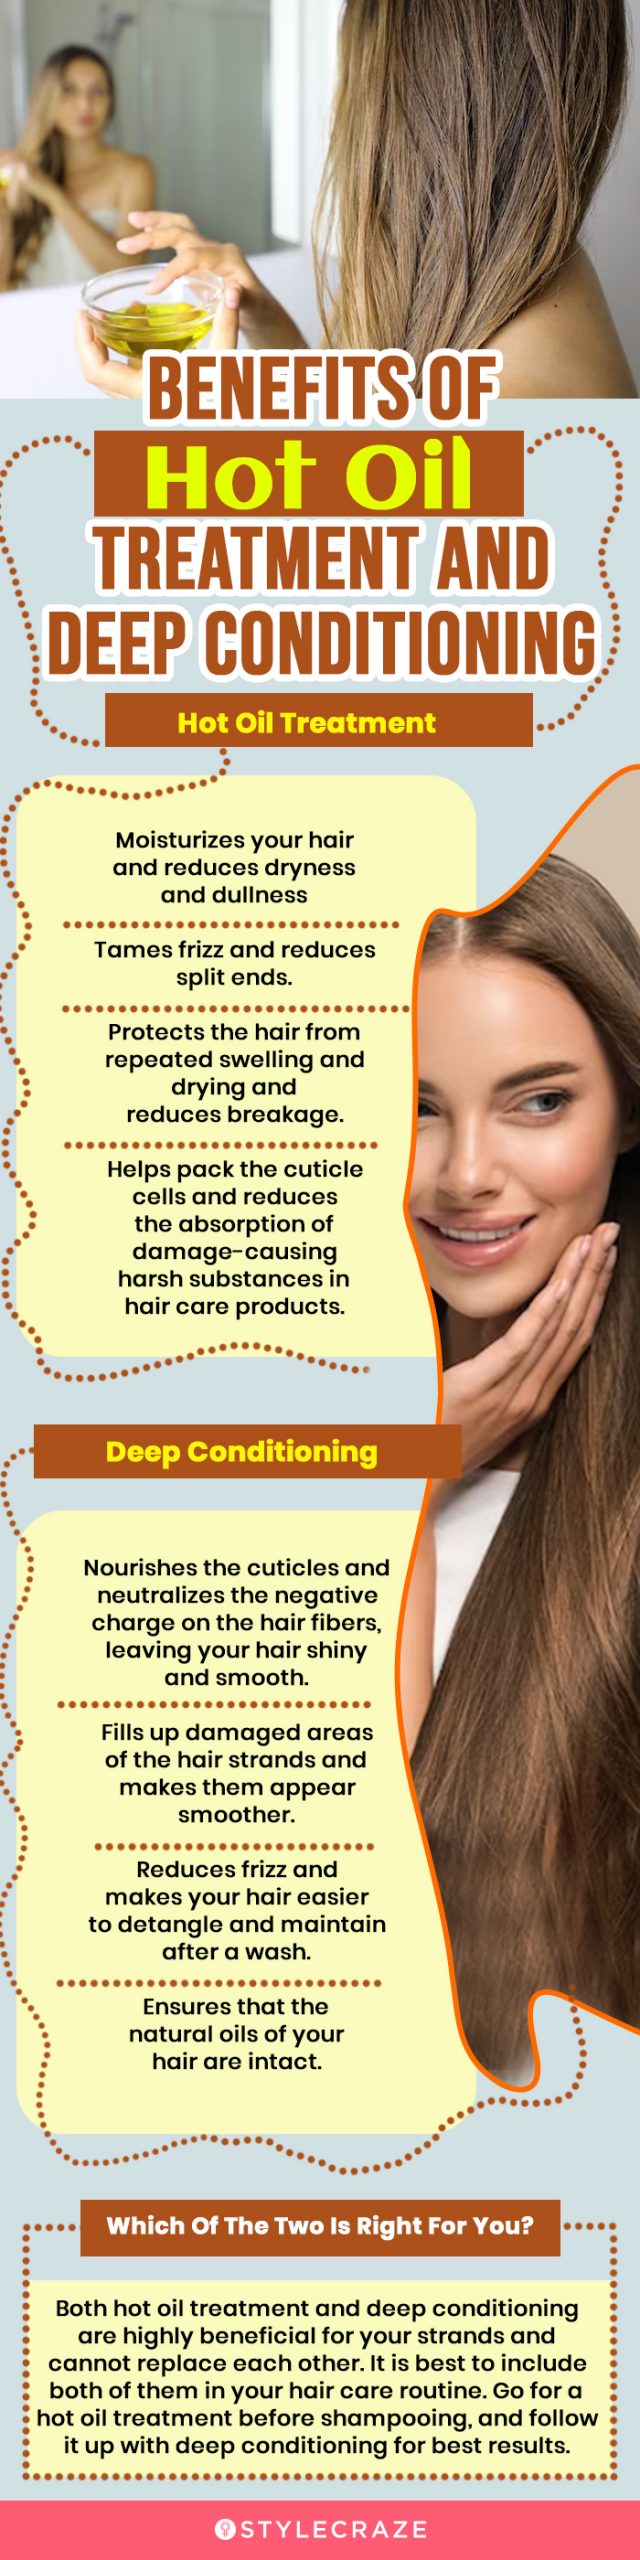 benefits of hot oil treatment and deep conditioning (infographic)